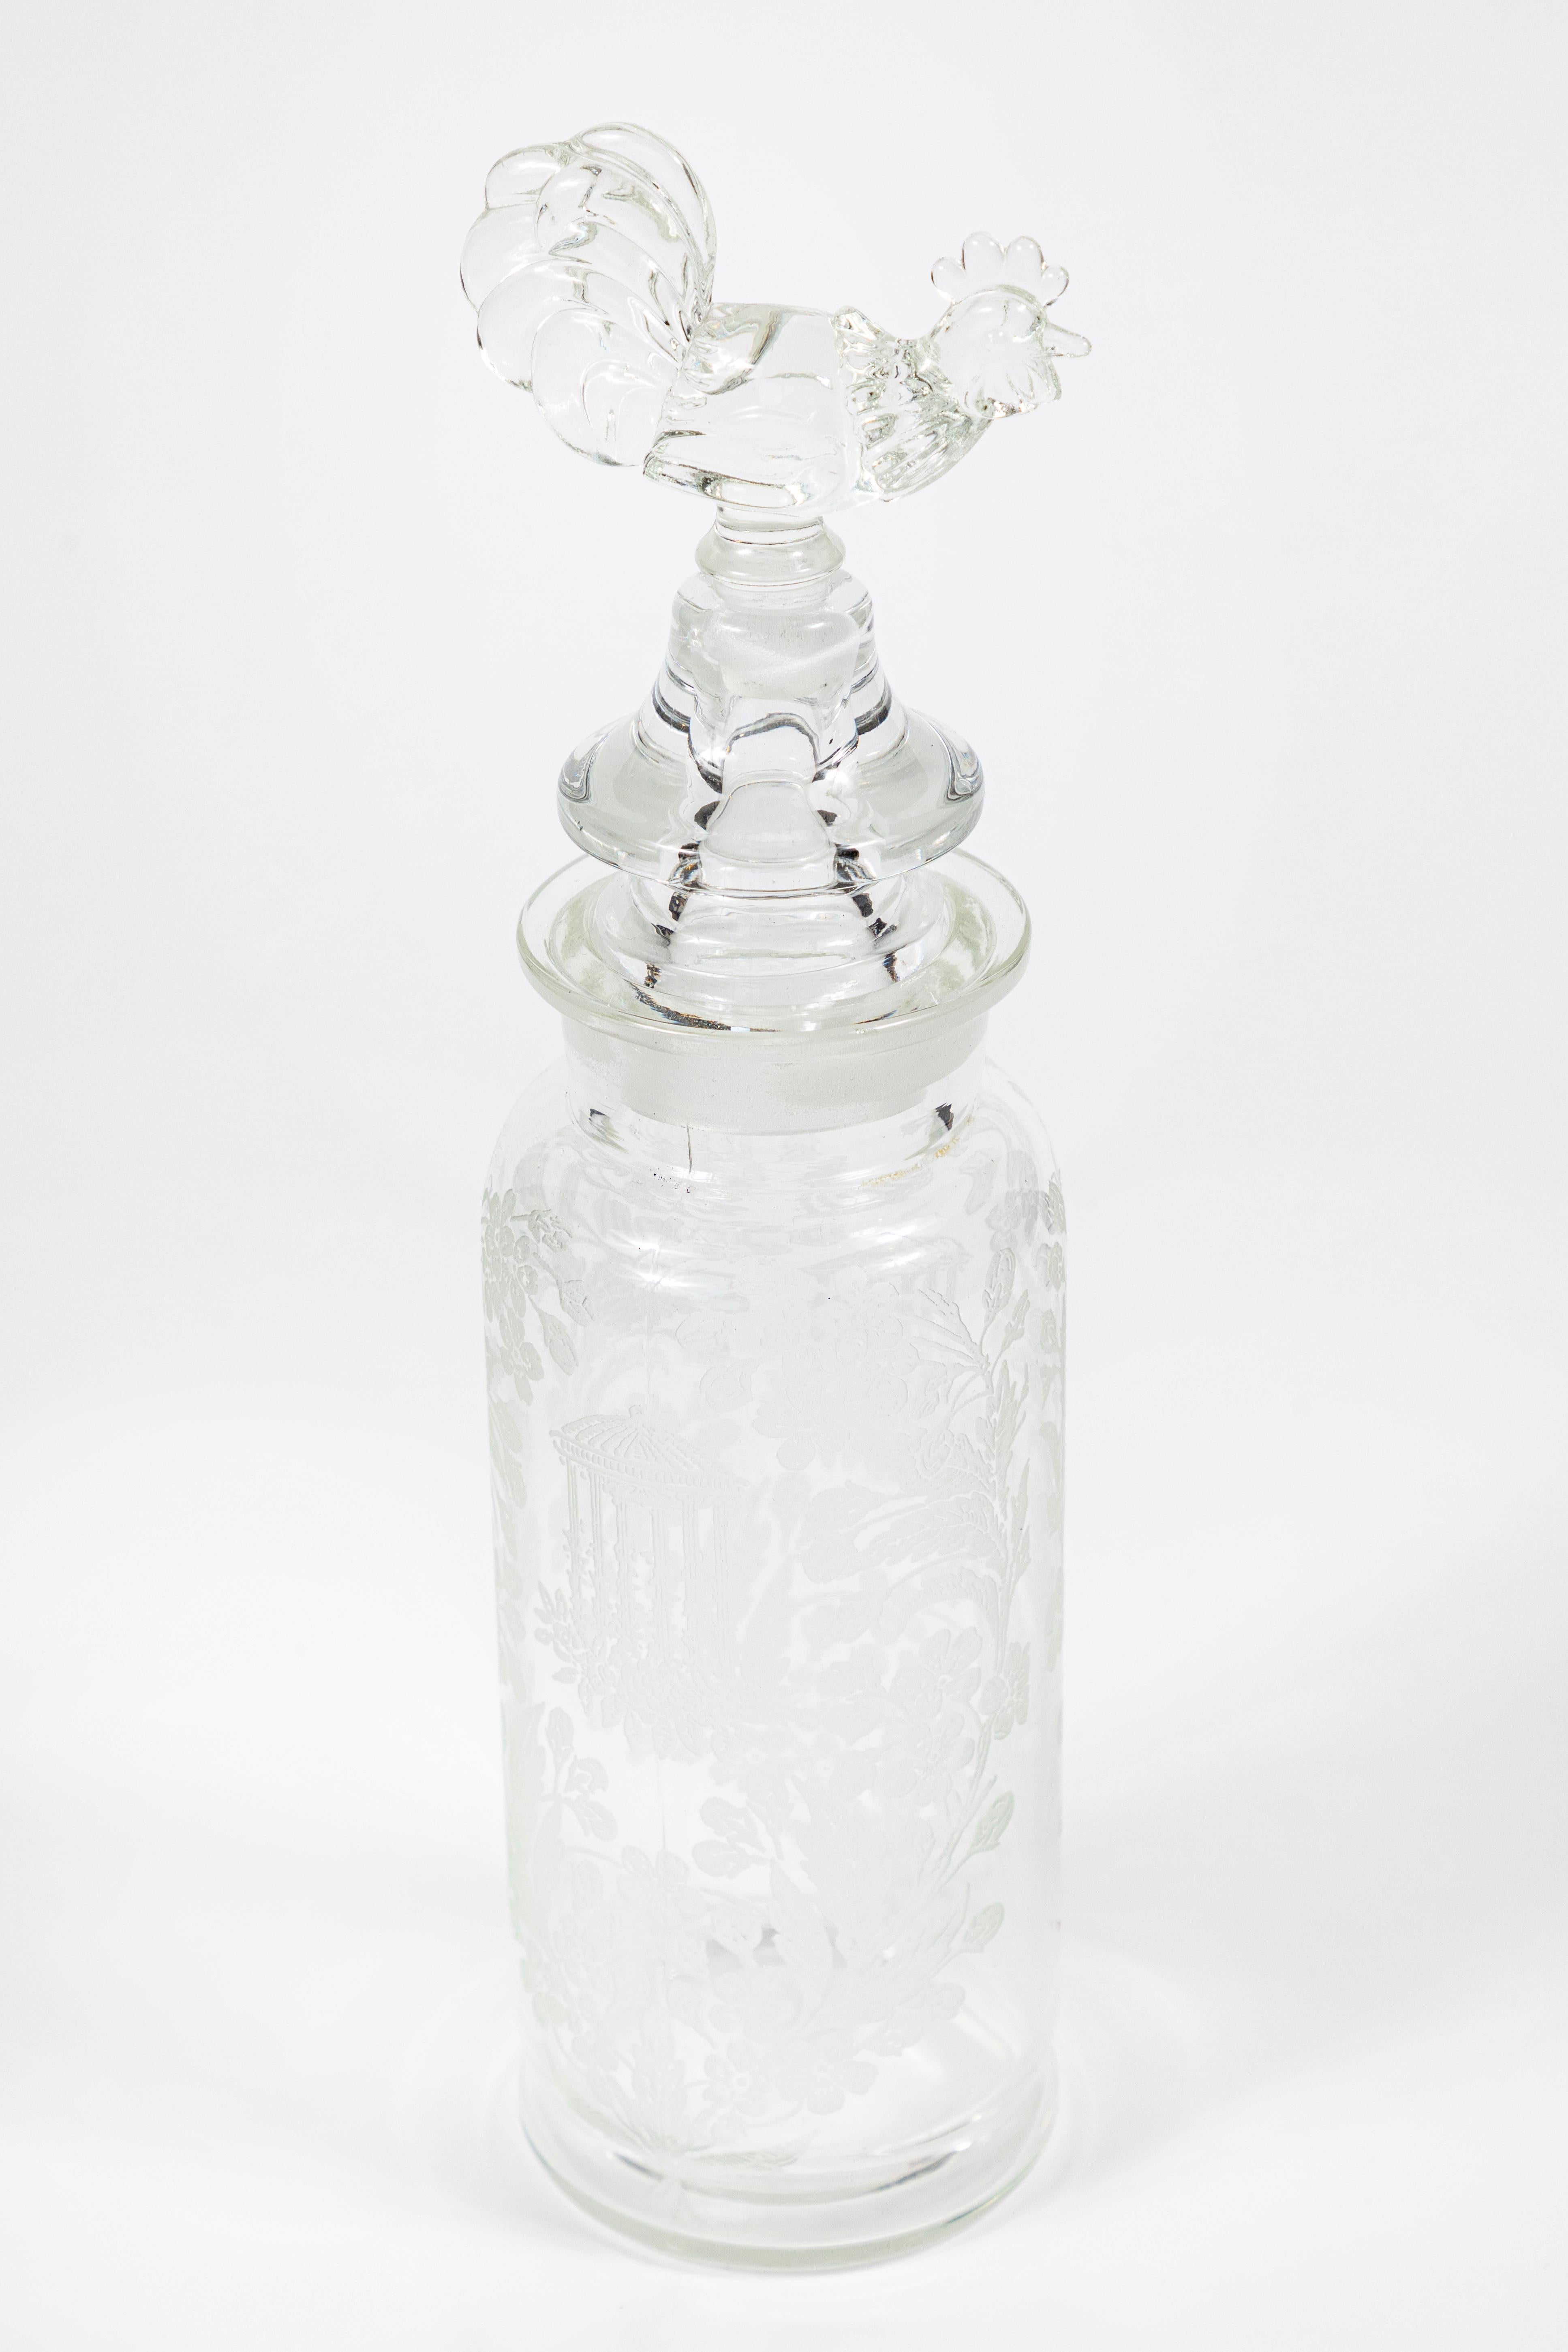 A beautiful vintage cocktail Shaker from the 1930s with a romantic intricately acid etched gazebo and floral design.

The Shaker with its rooster motif finial stands 13 inches high, including the finial, and has an approximate 3 and ½ inch base.